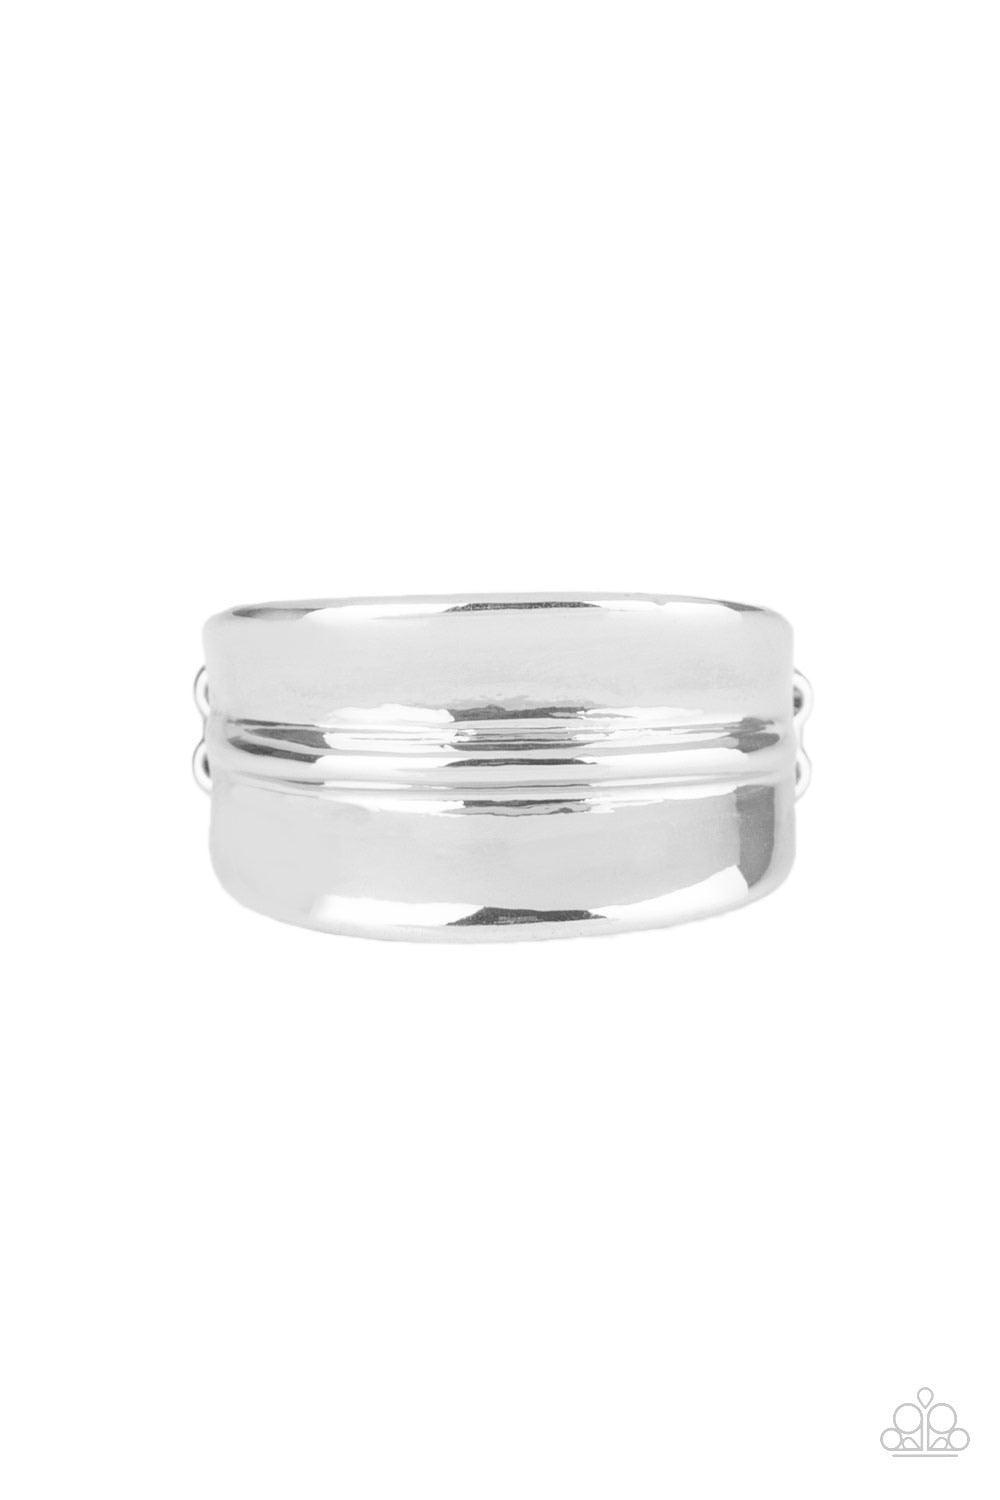 Paparazzi Accessories Band Together - Silver Brushed in a high-sheen finish, a rippling silver band arcs across the finger for a classic look. Features a dainty stretchy band for a flexible fit. Sold as one individual ring. Jewelry